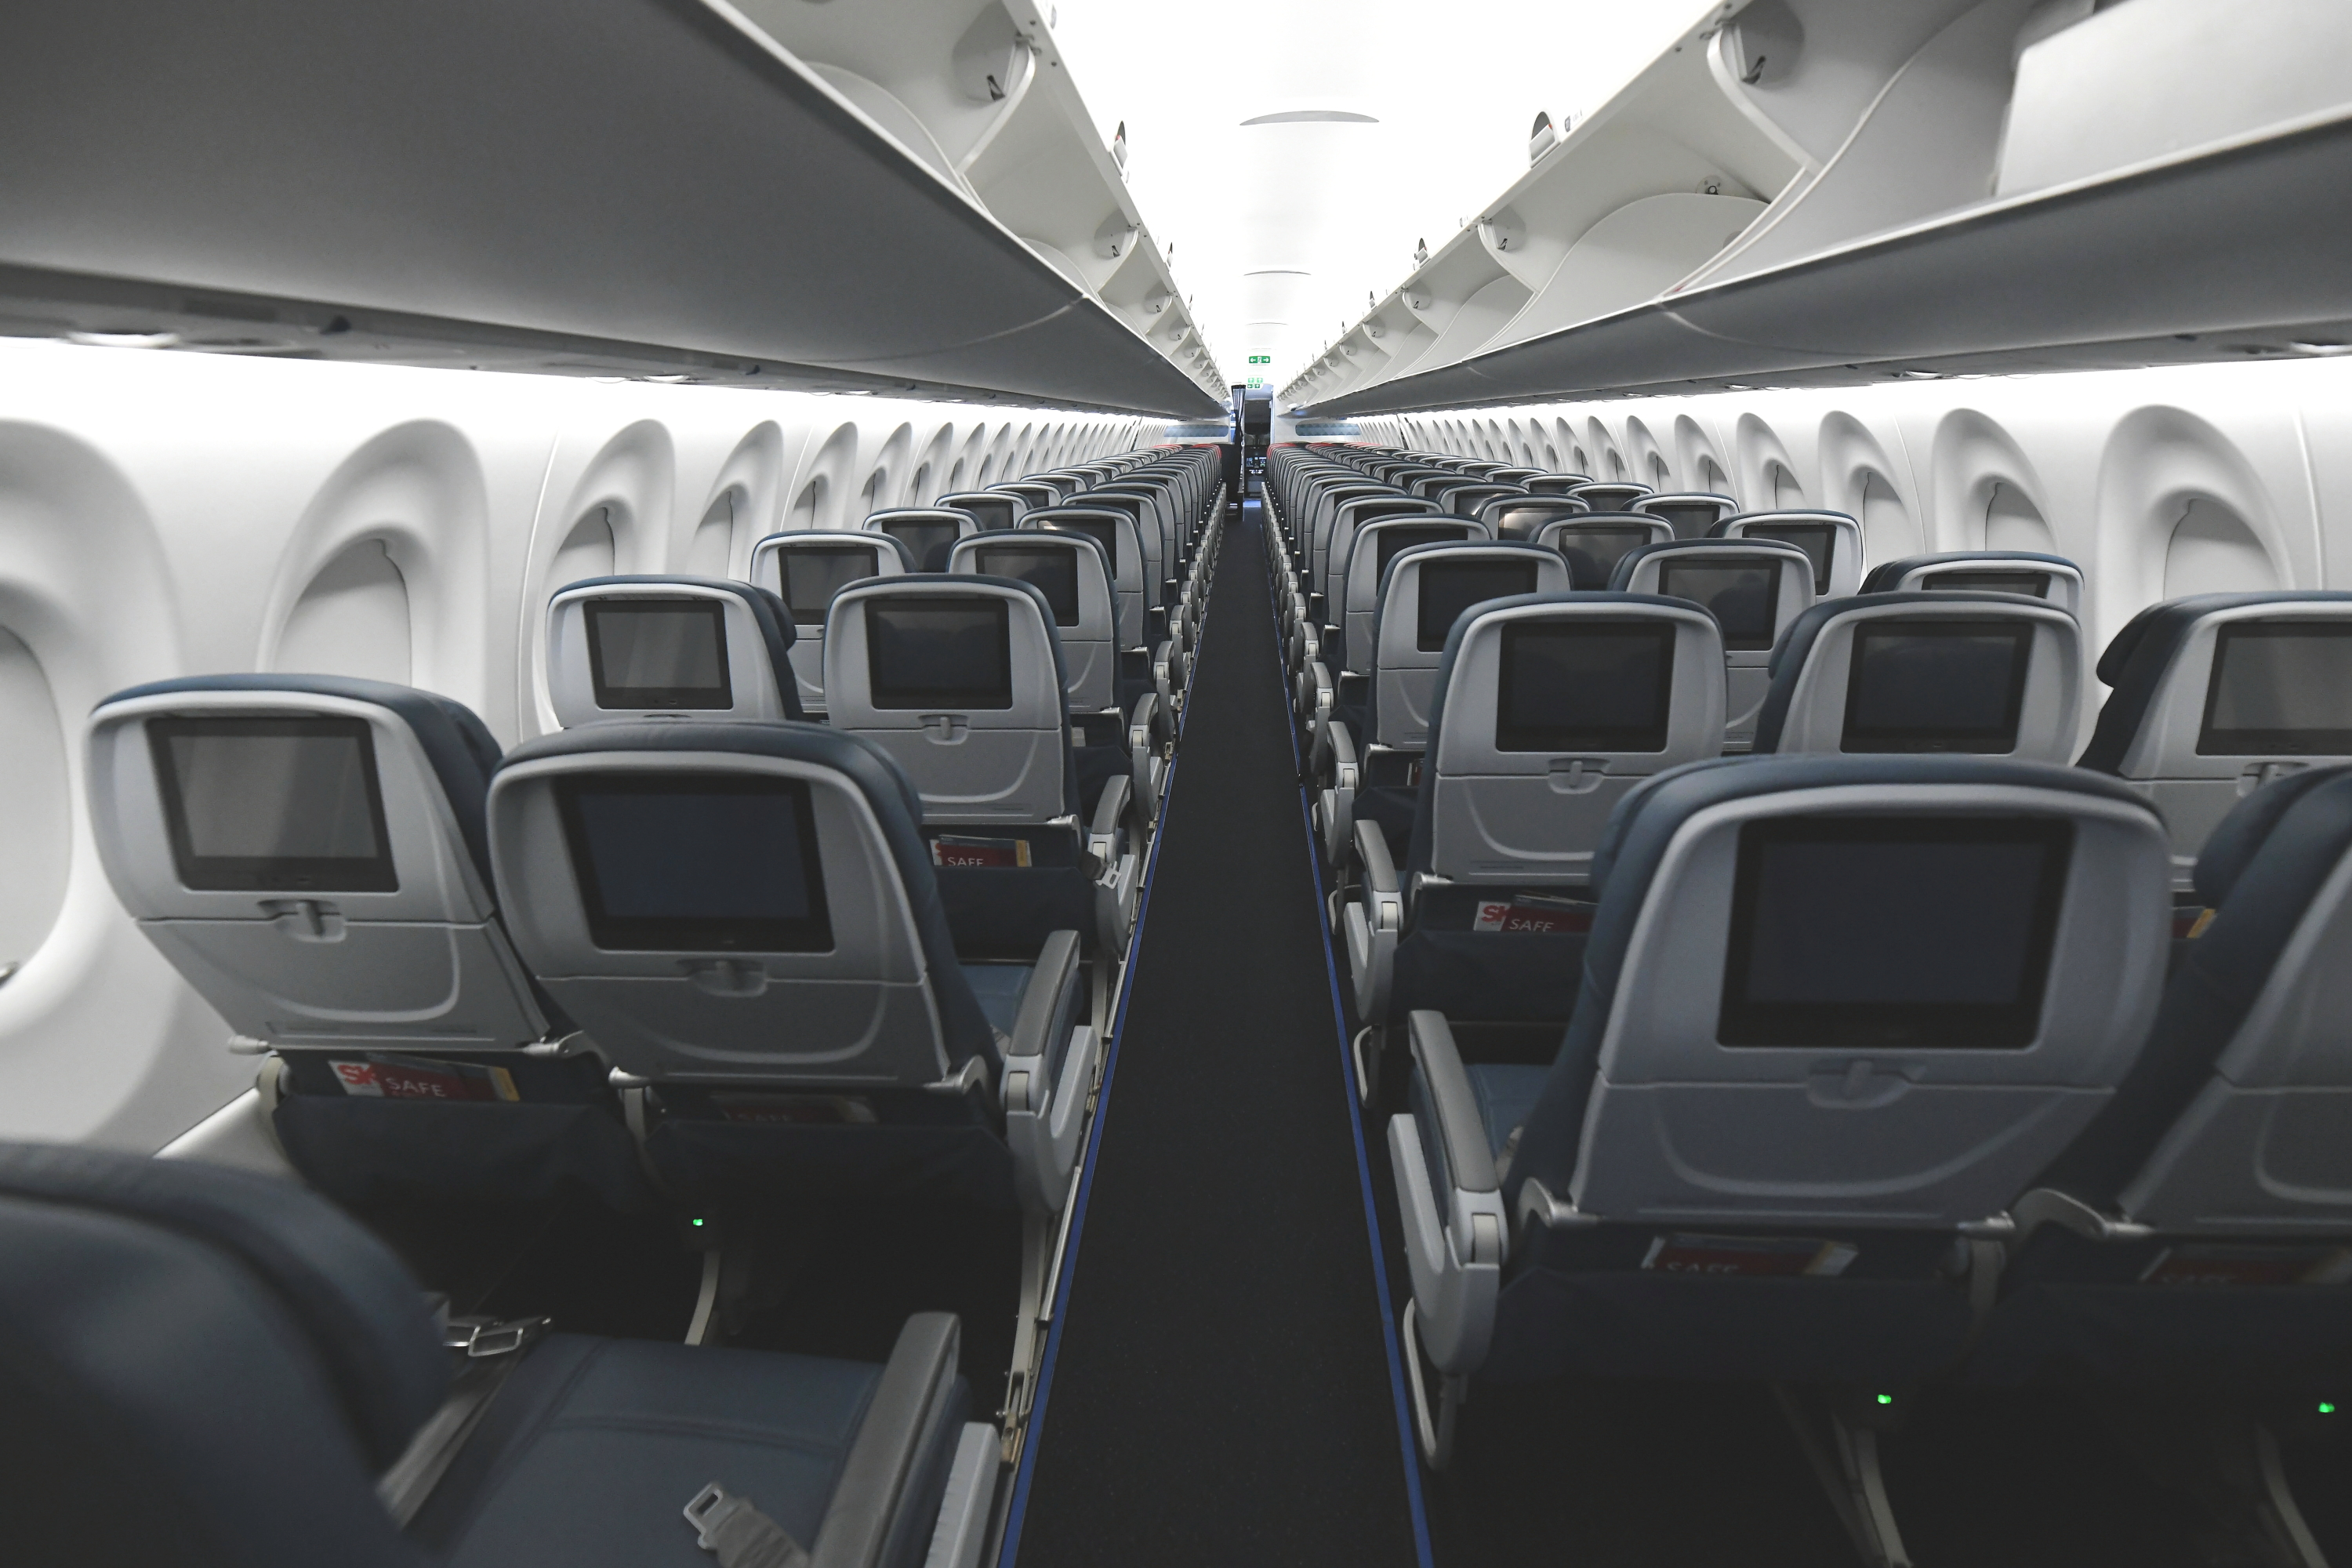 Cabin of Delta's Airbus A220-100. Click to enlarge.